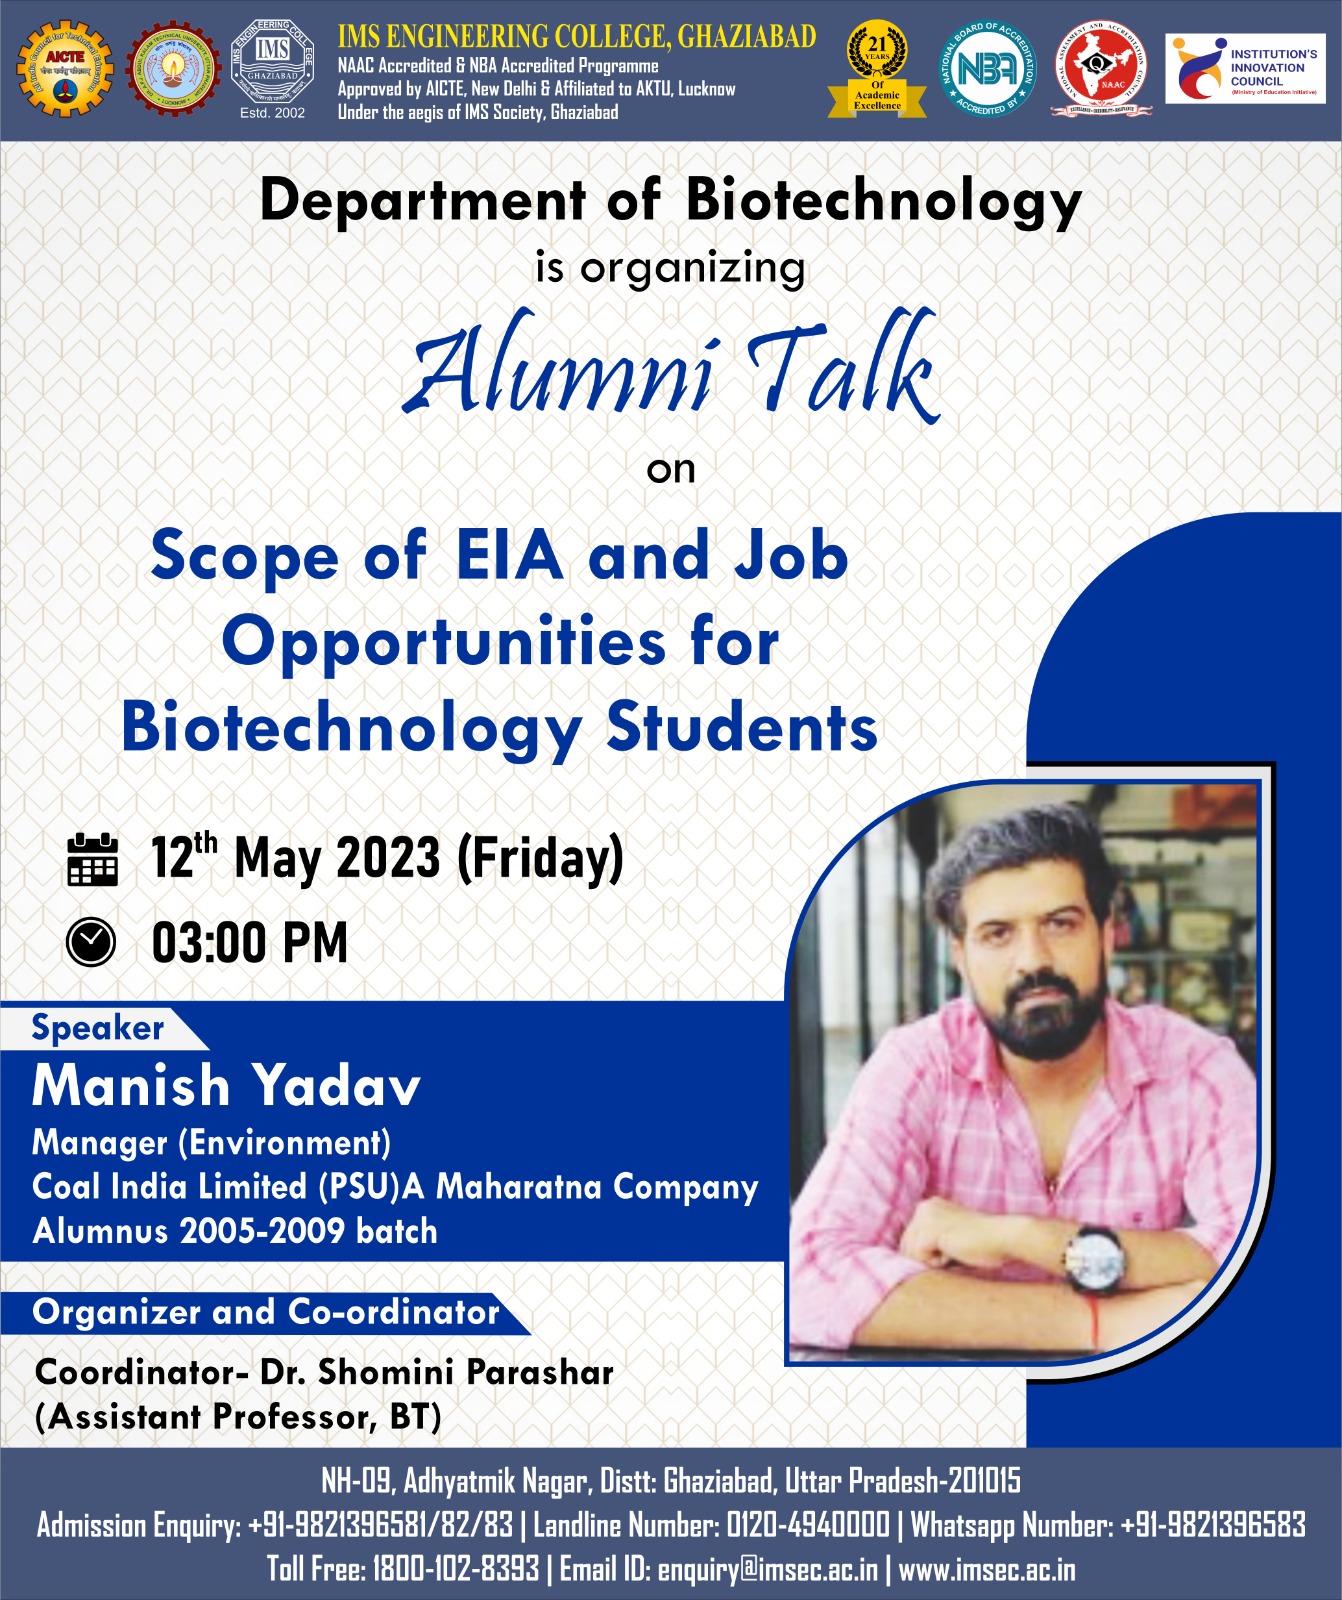 Scope of EIA and Job Opportunities for Biotechnology Students